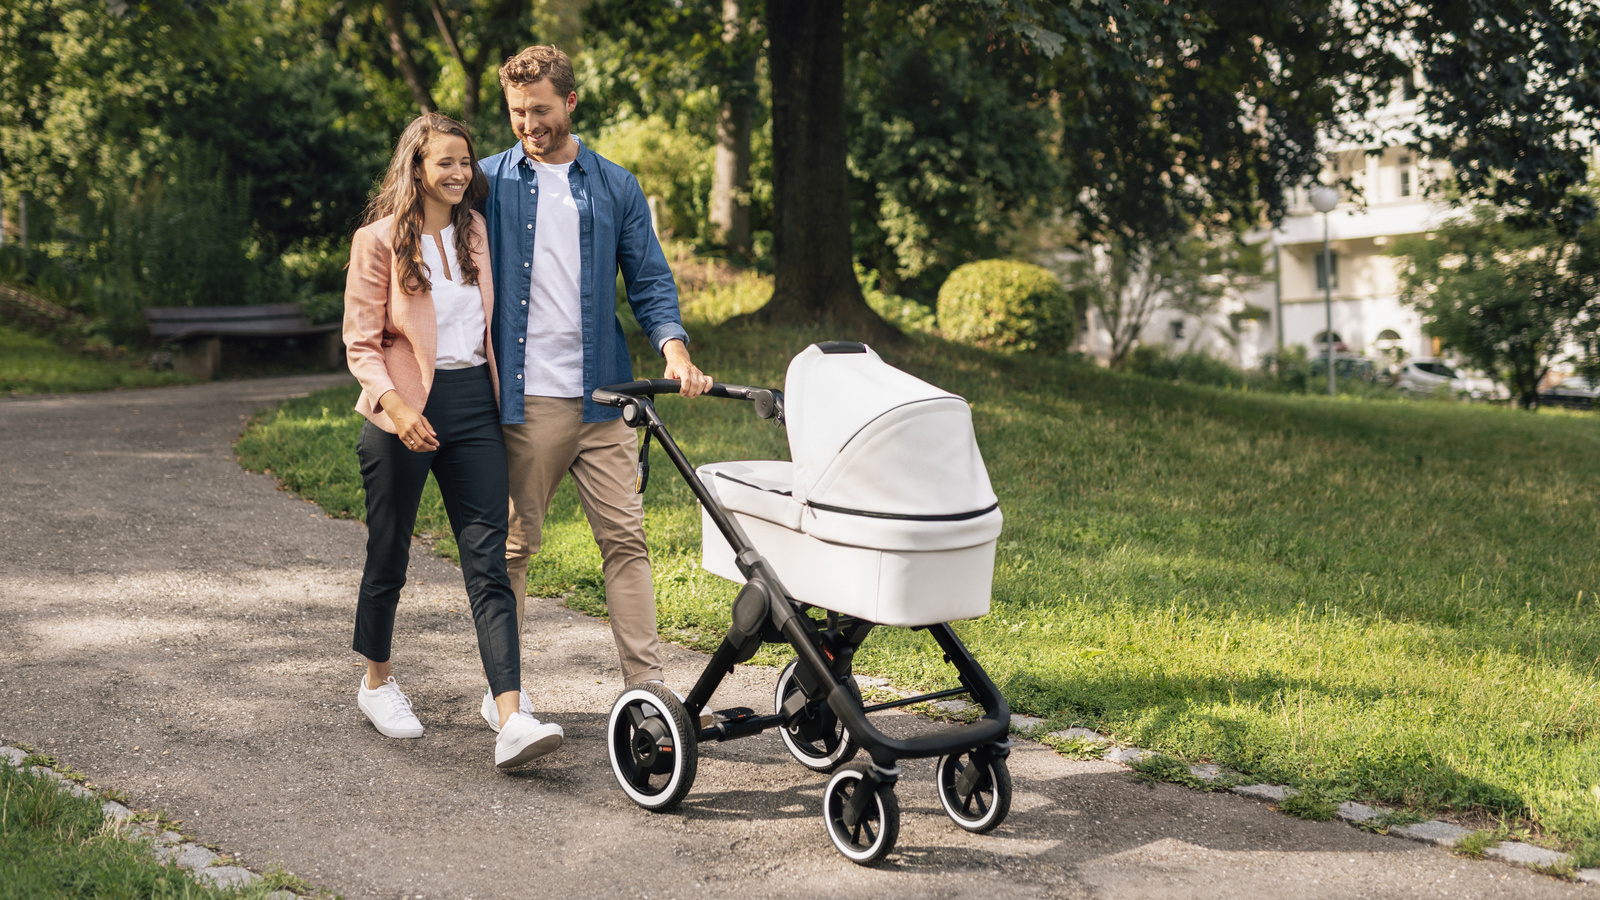 From the wind tunnel to the sidewalk: Bosch is bringing smart electrical drives to strollers